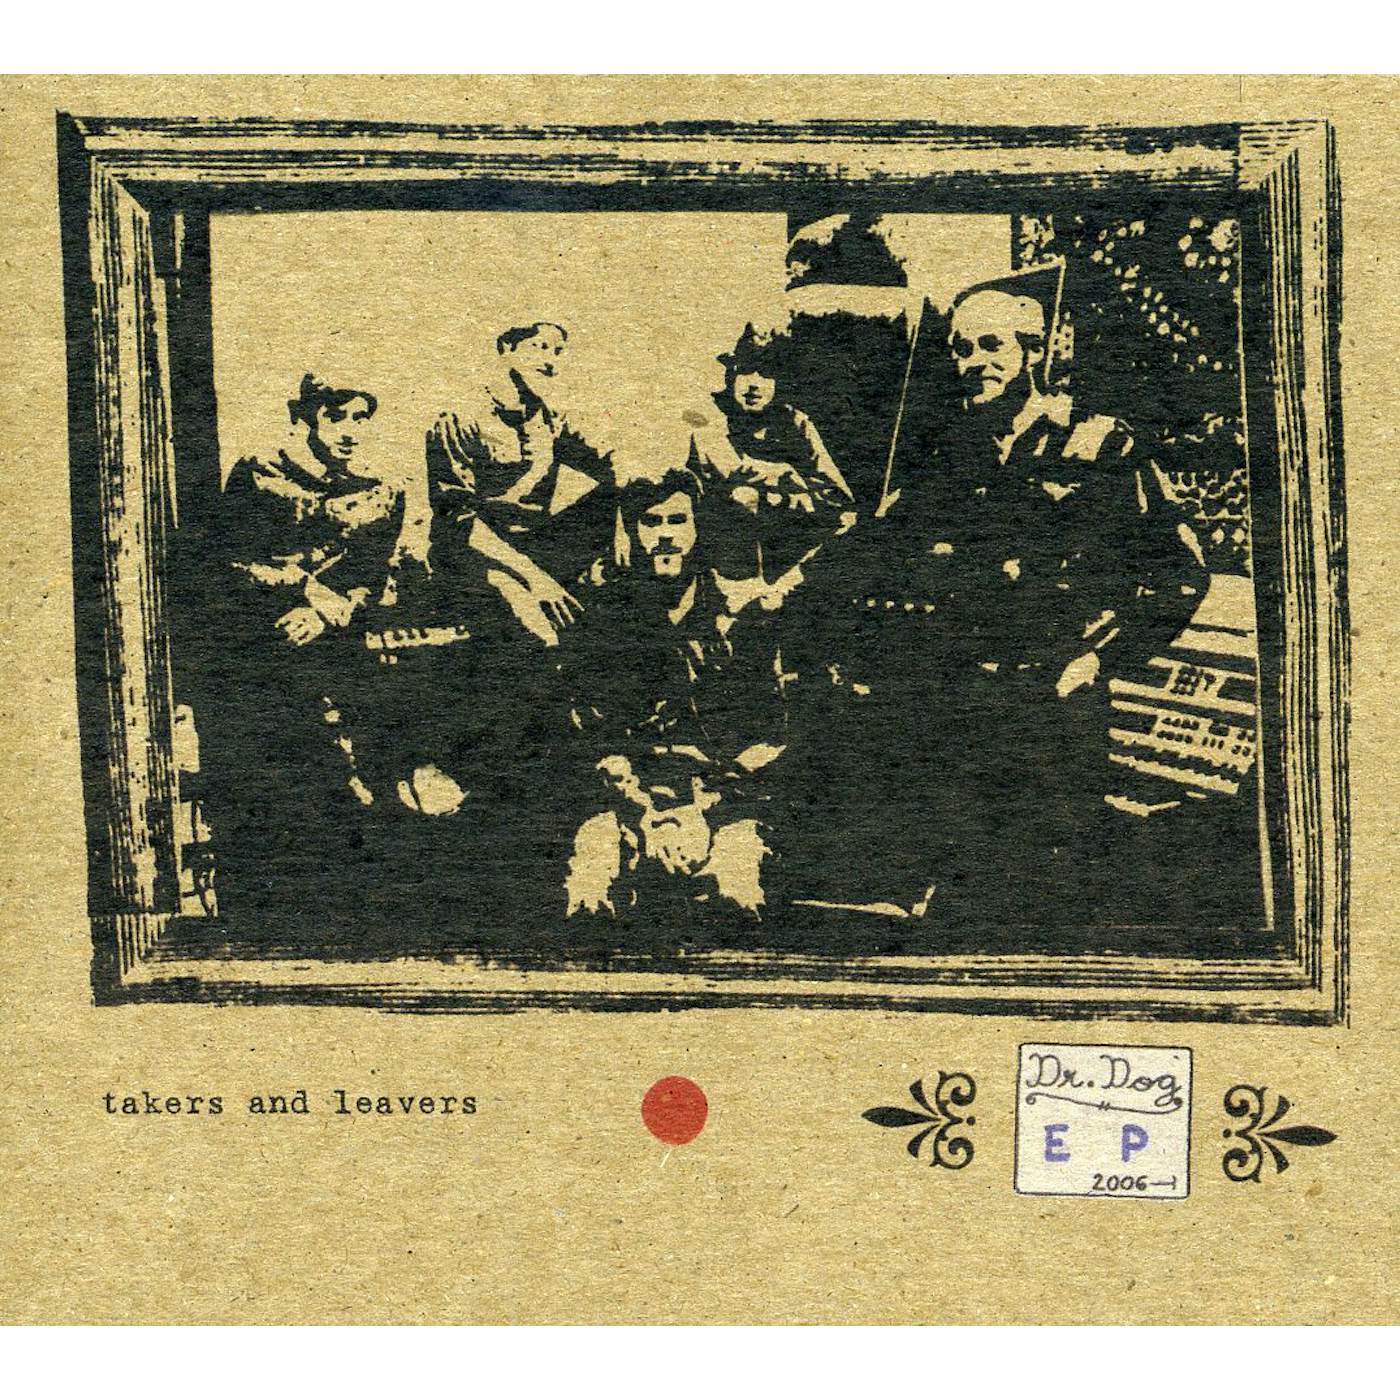 Dr. Dog TAKERS & LEAVERS CD